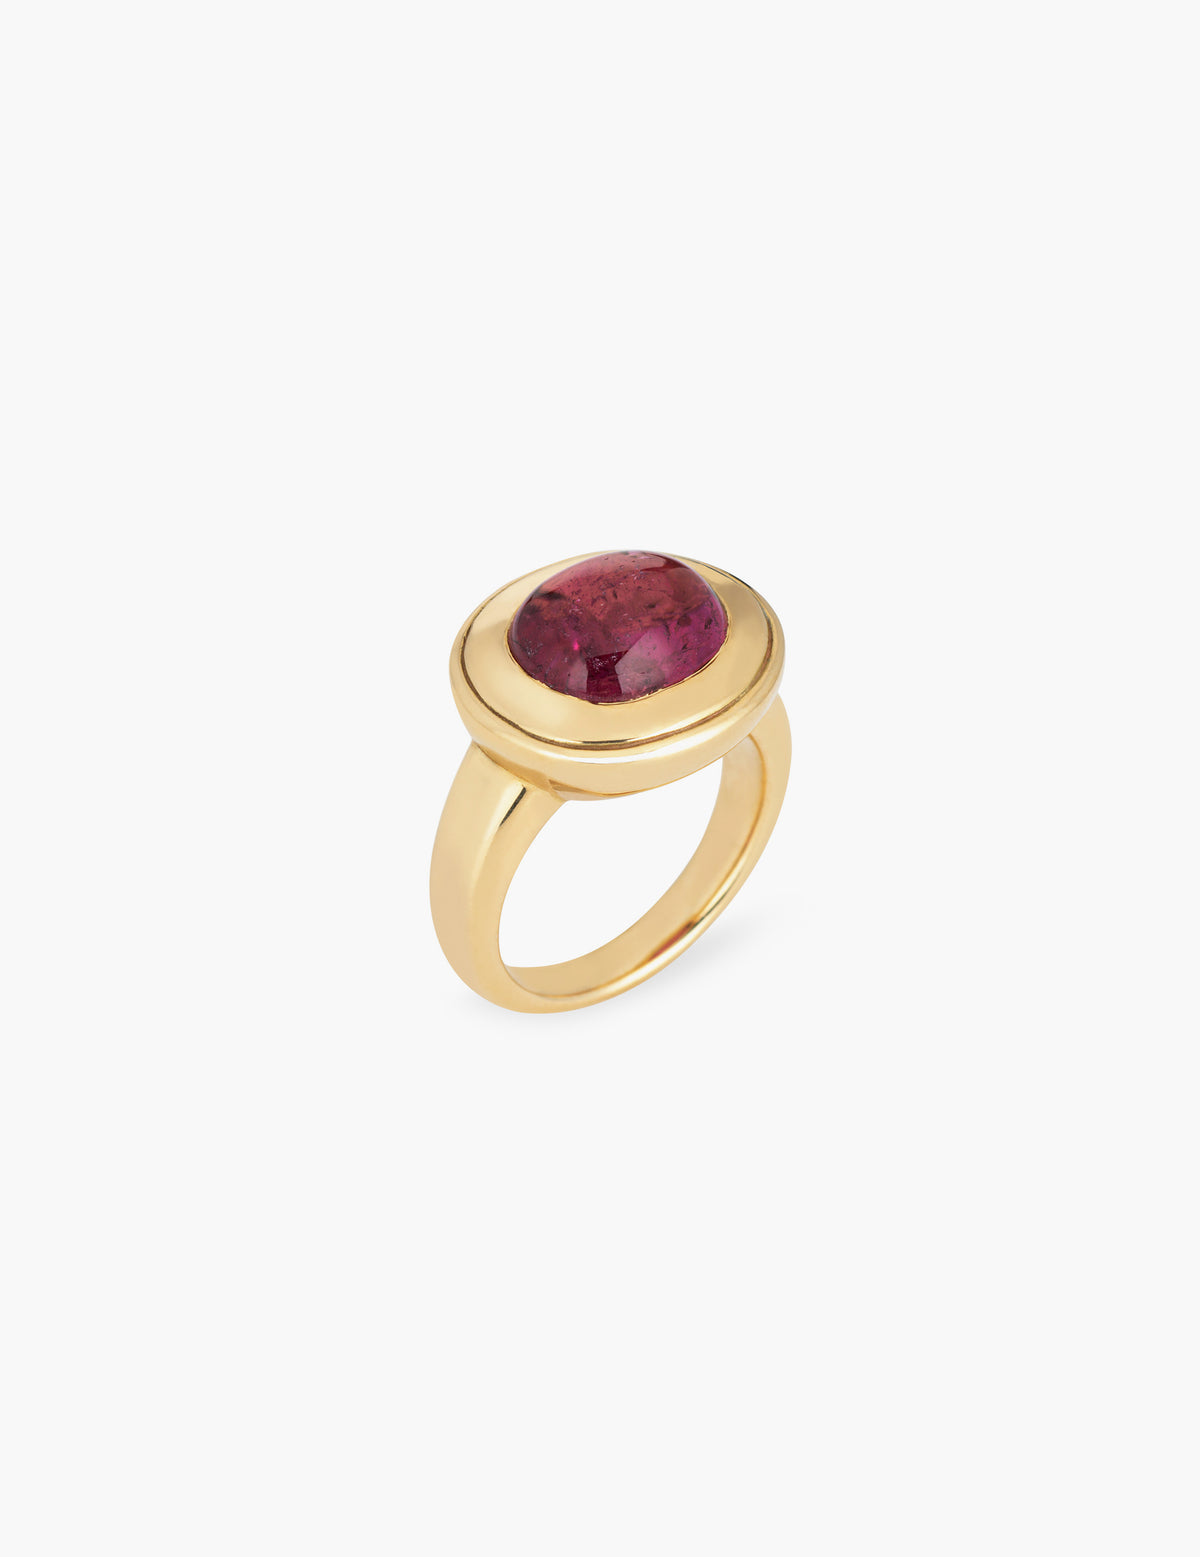 Hand-carved Tourmaline Ring